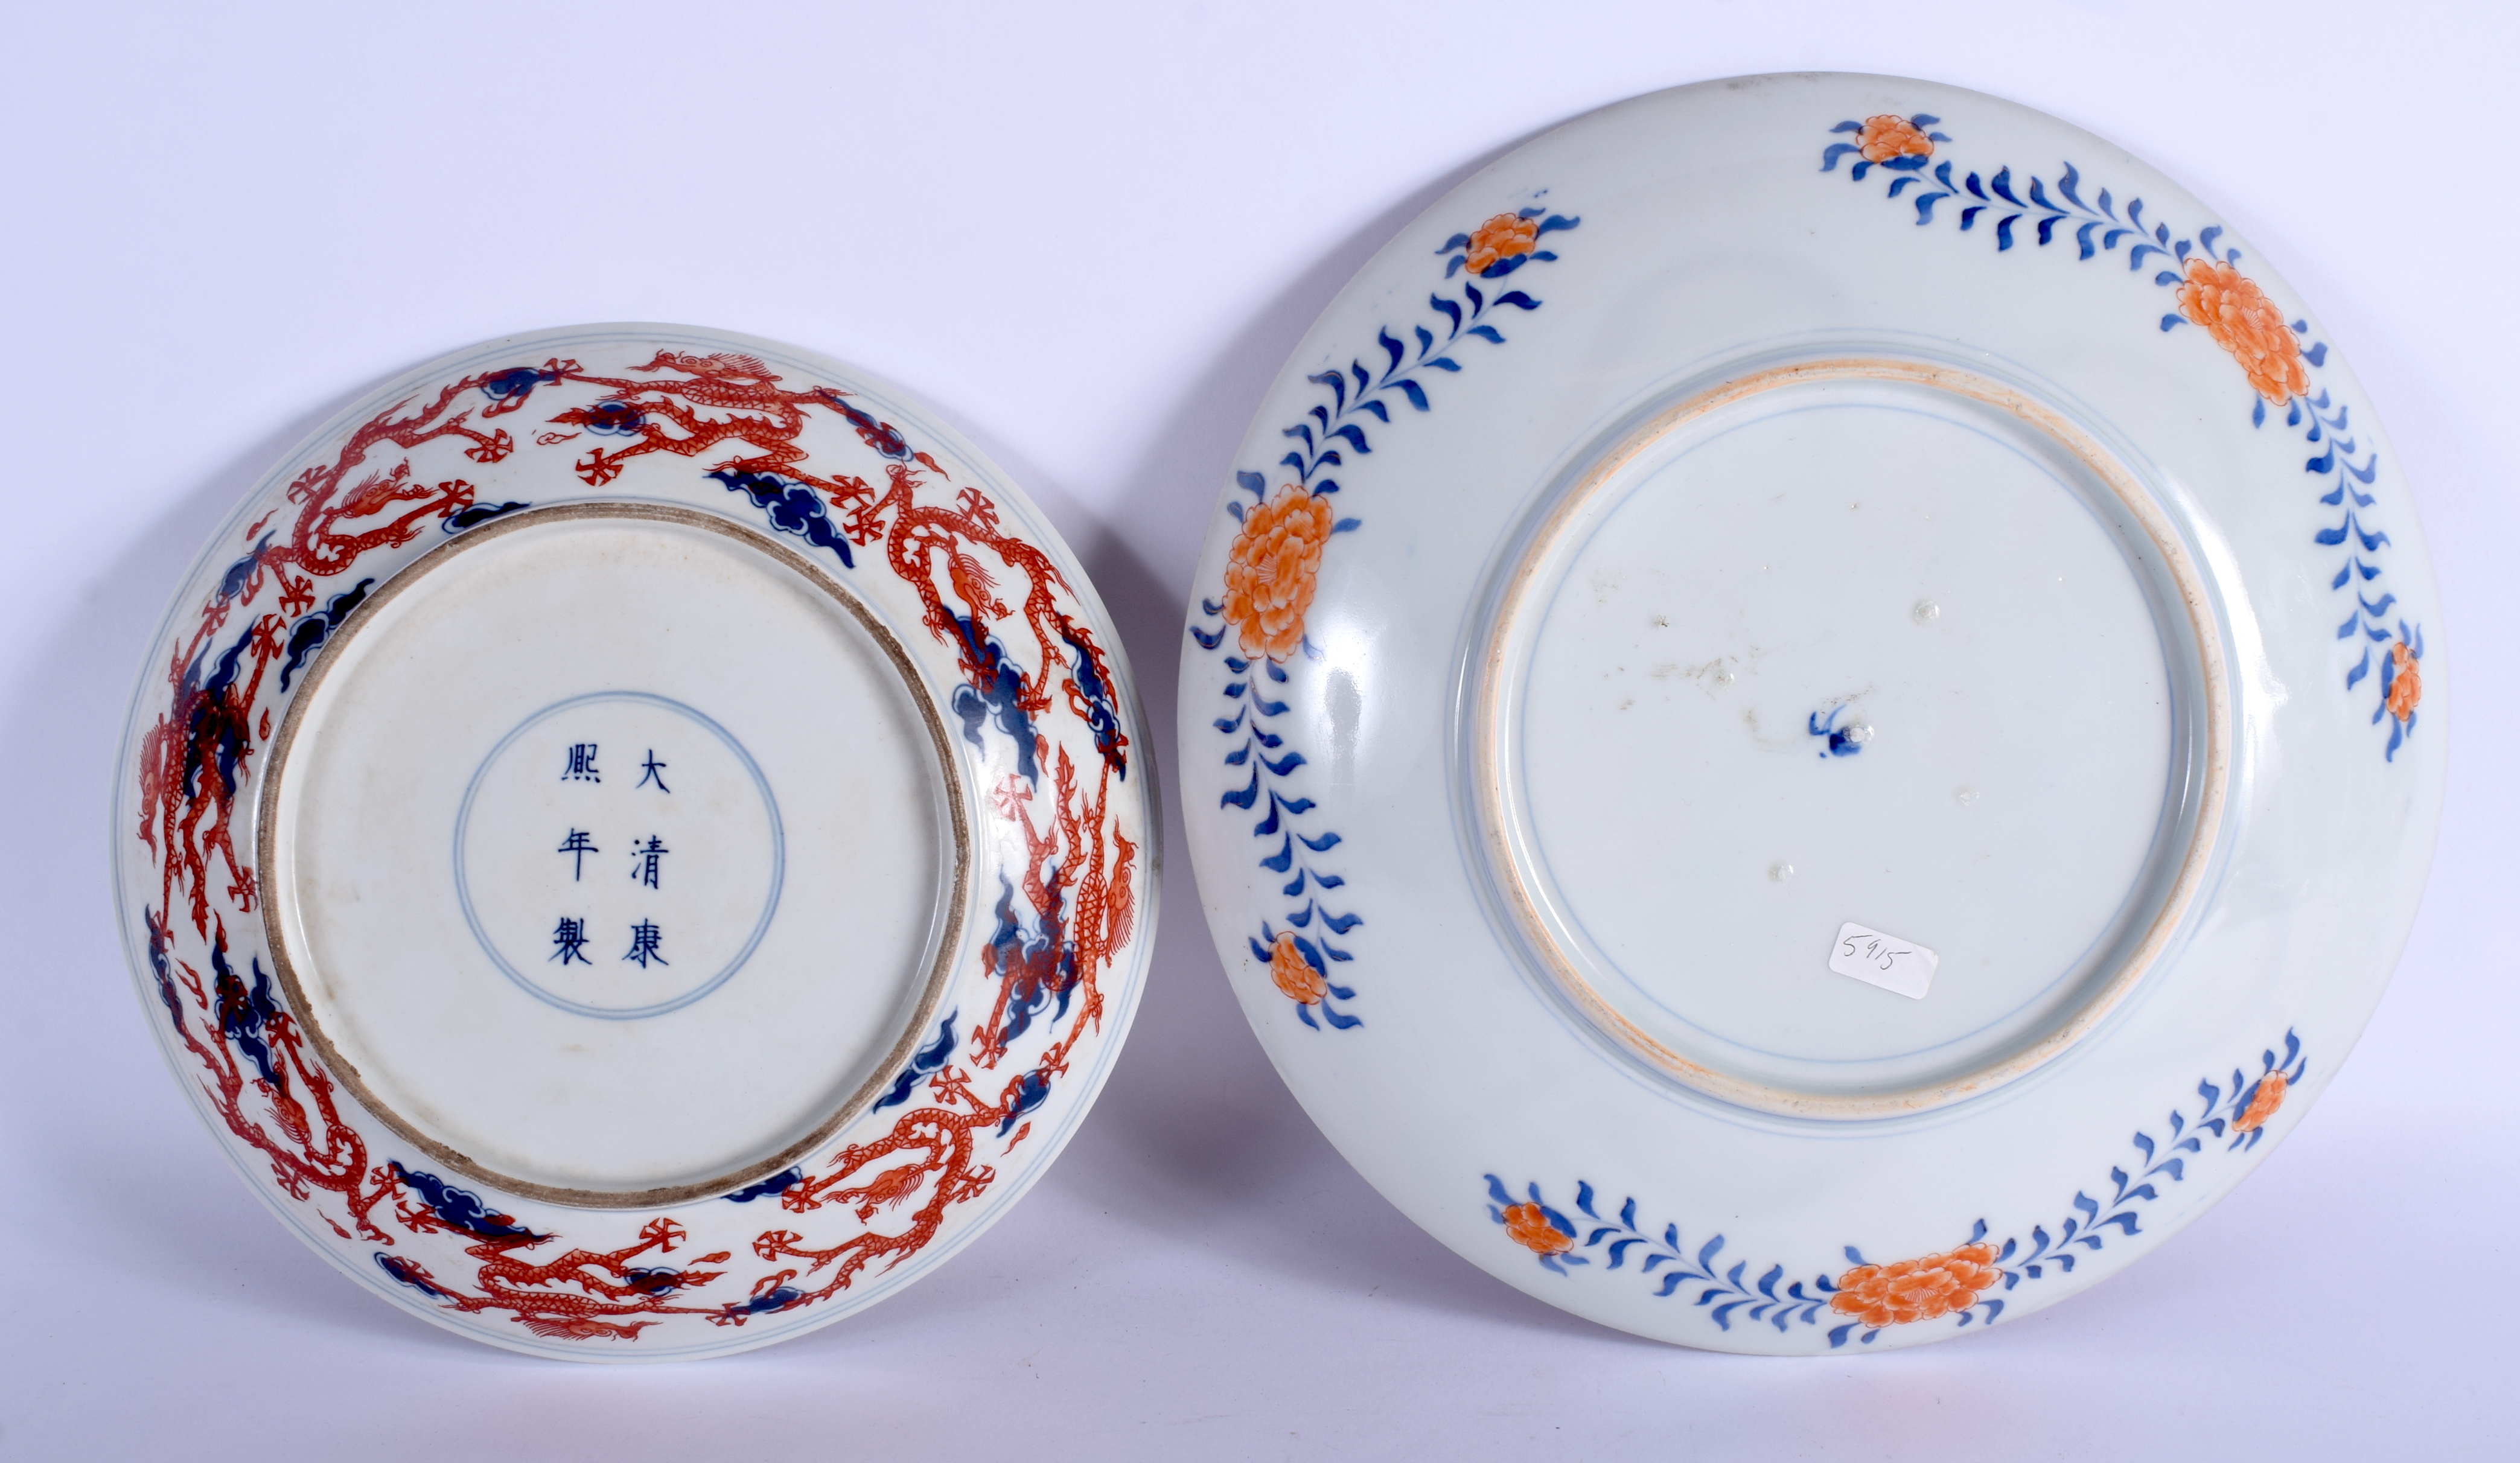 A LARGE 19TH CENTURY JAPANESE MEIJI PERIOD IMARI CHARGER together with a dragon dish. 30 cm & 24 cm - Image 2 of 2